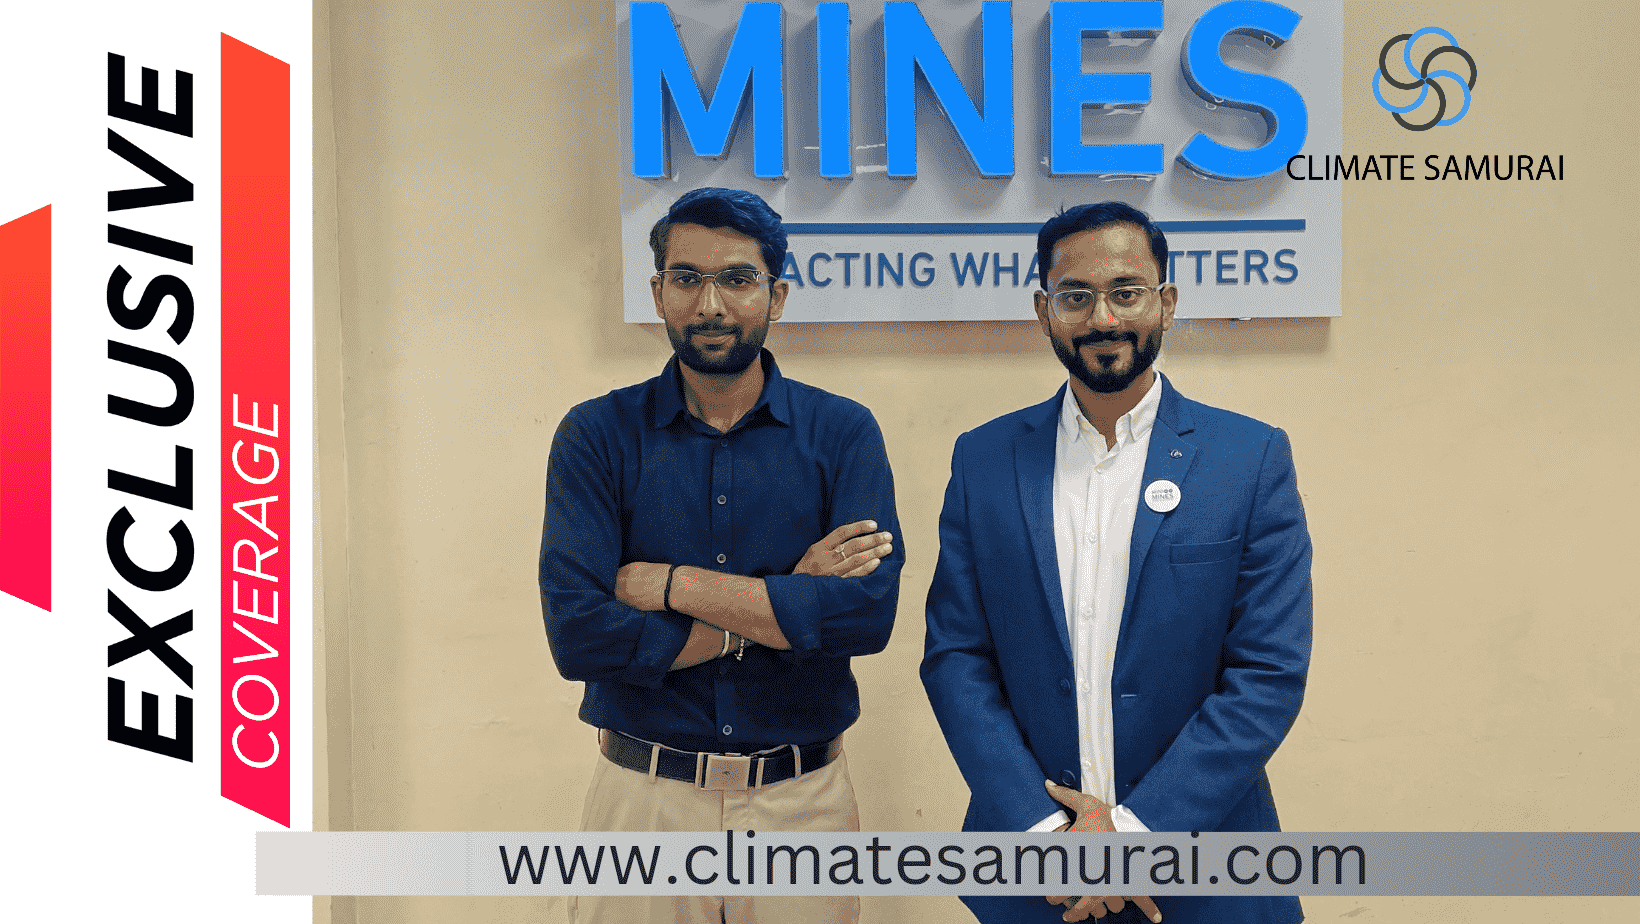 Anupam Kumar, Co-founder and CEO, MiniMines and Arvind Bhardwaj, Co-founder and CTO, MiniMines